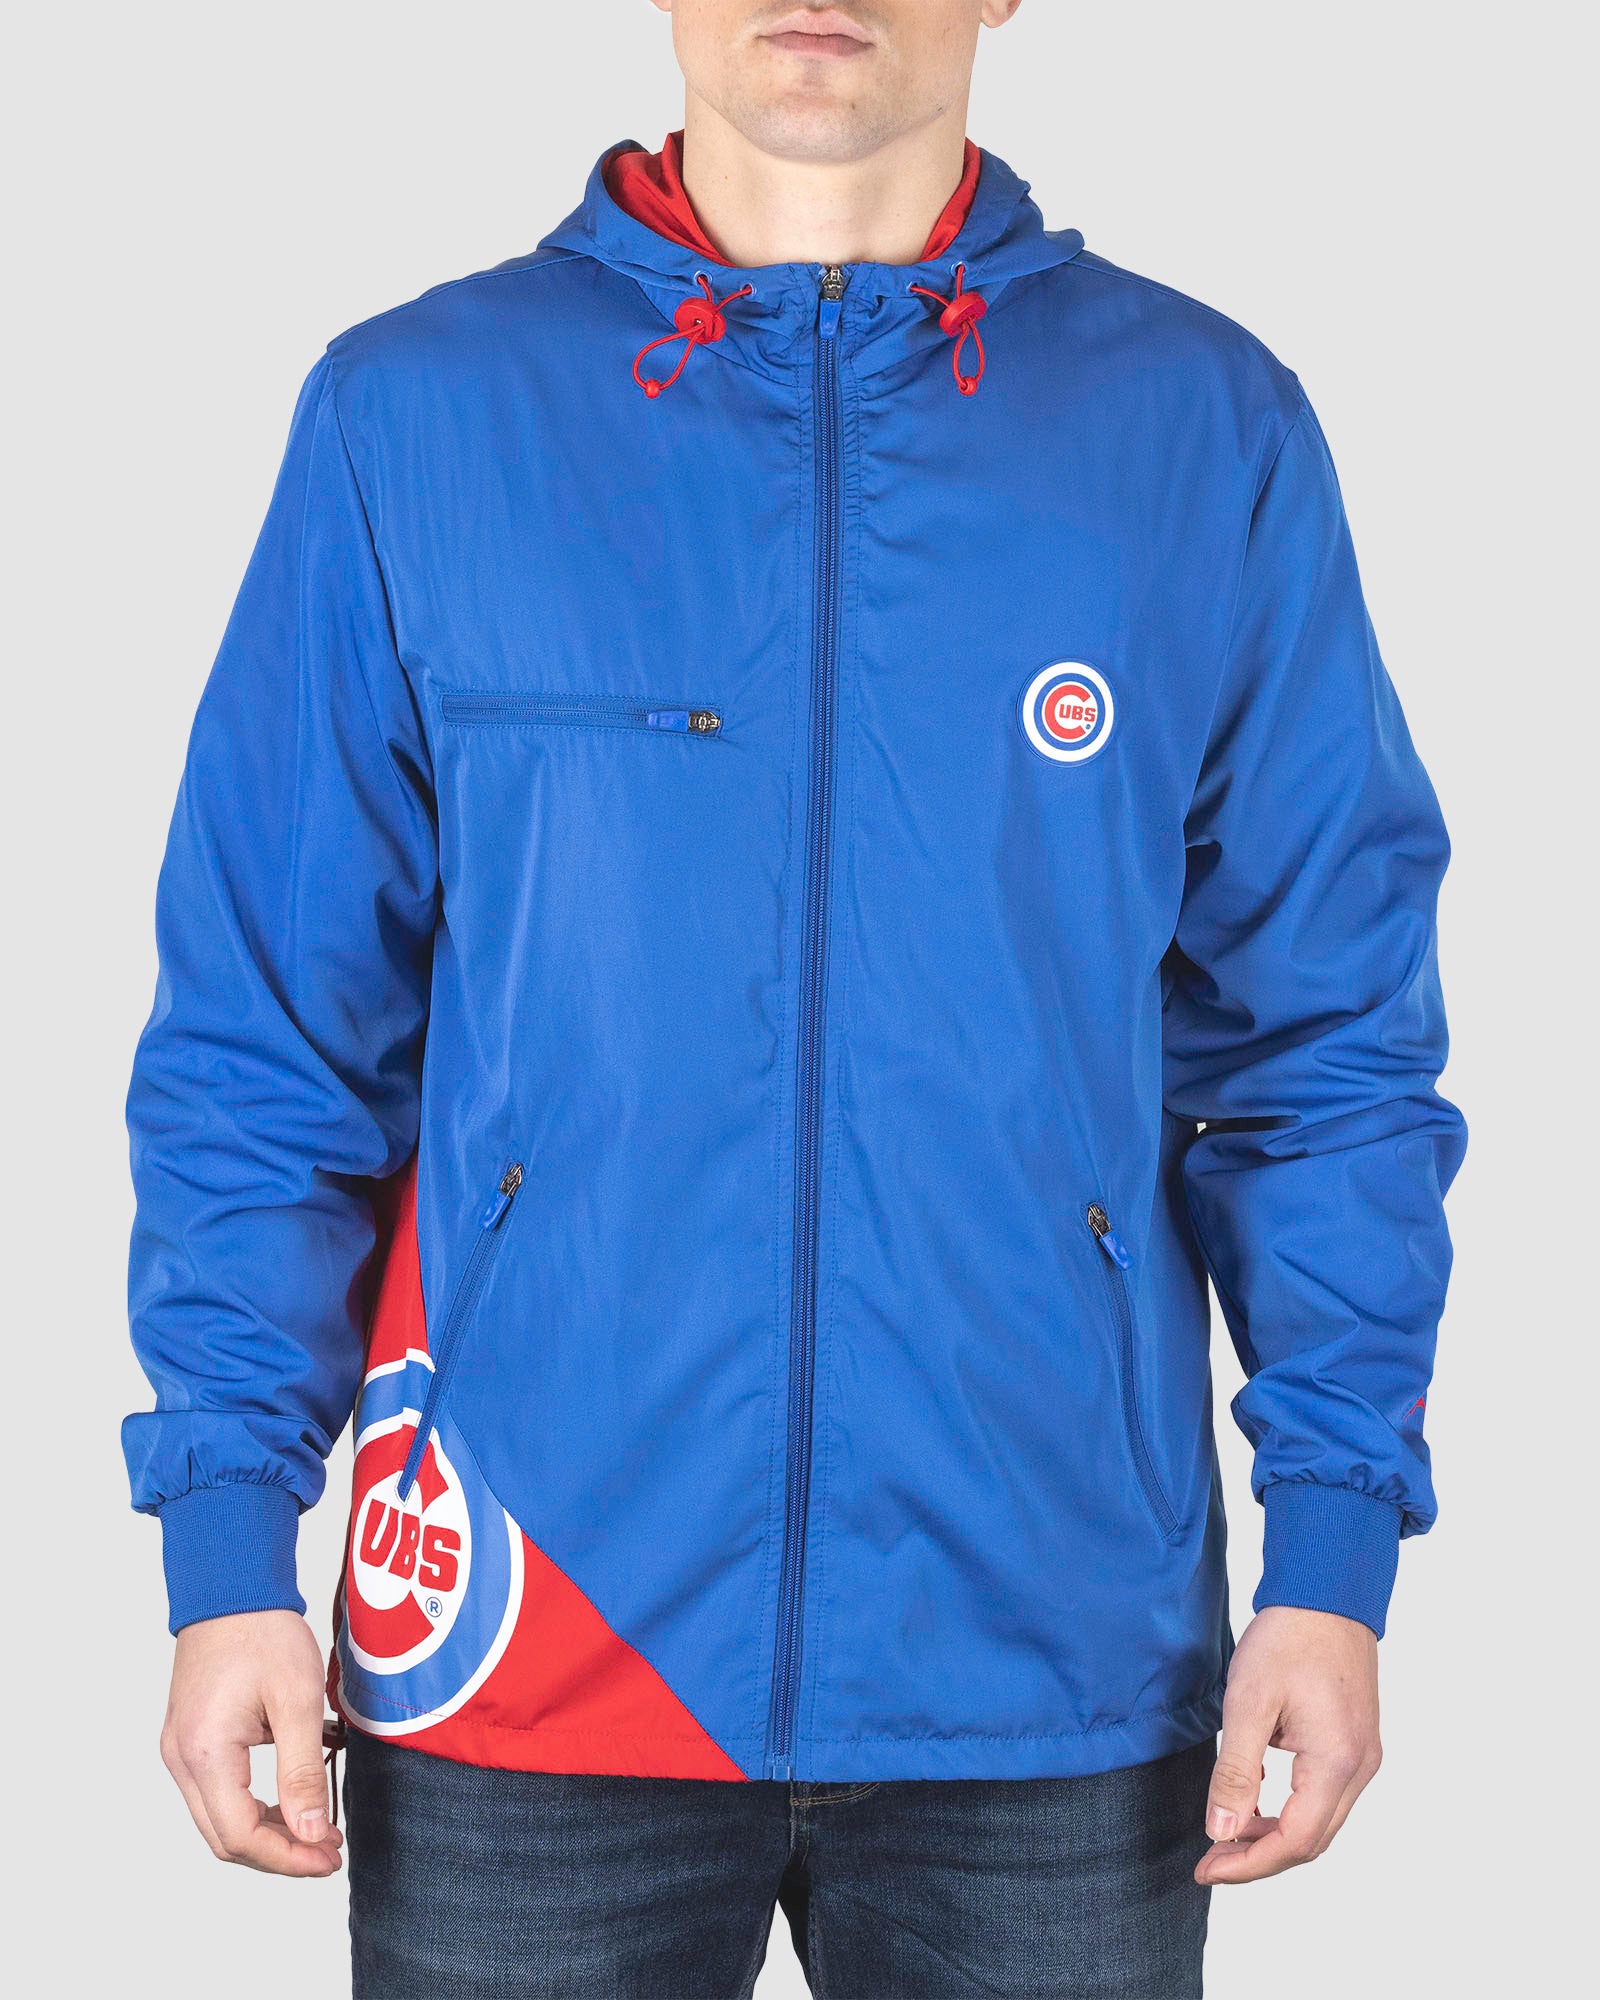 Chicago Cubs Youth Shirts - William Jacket